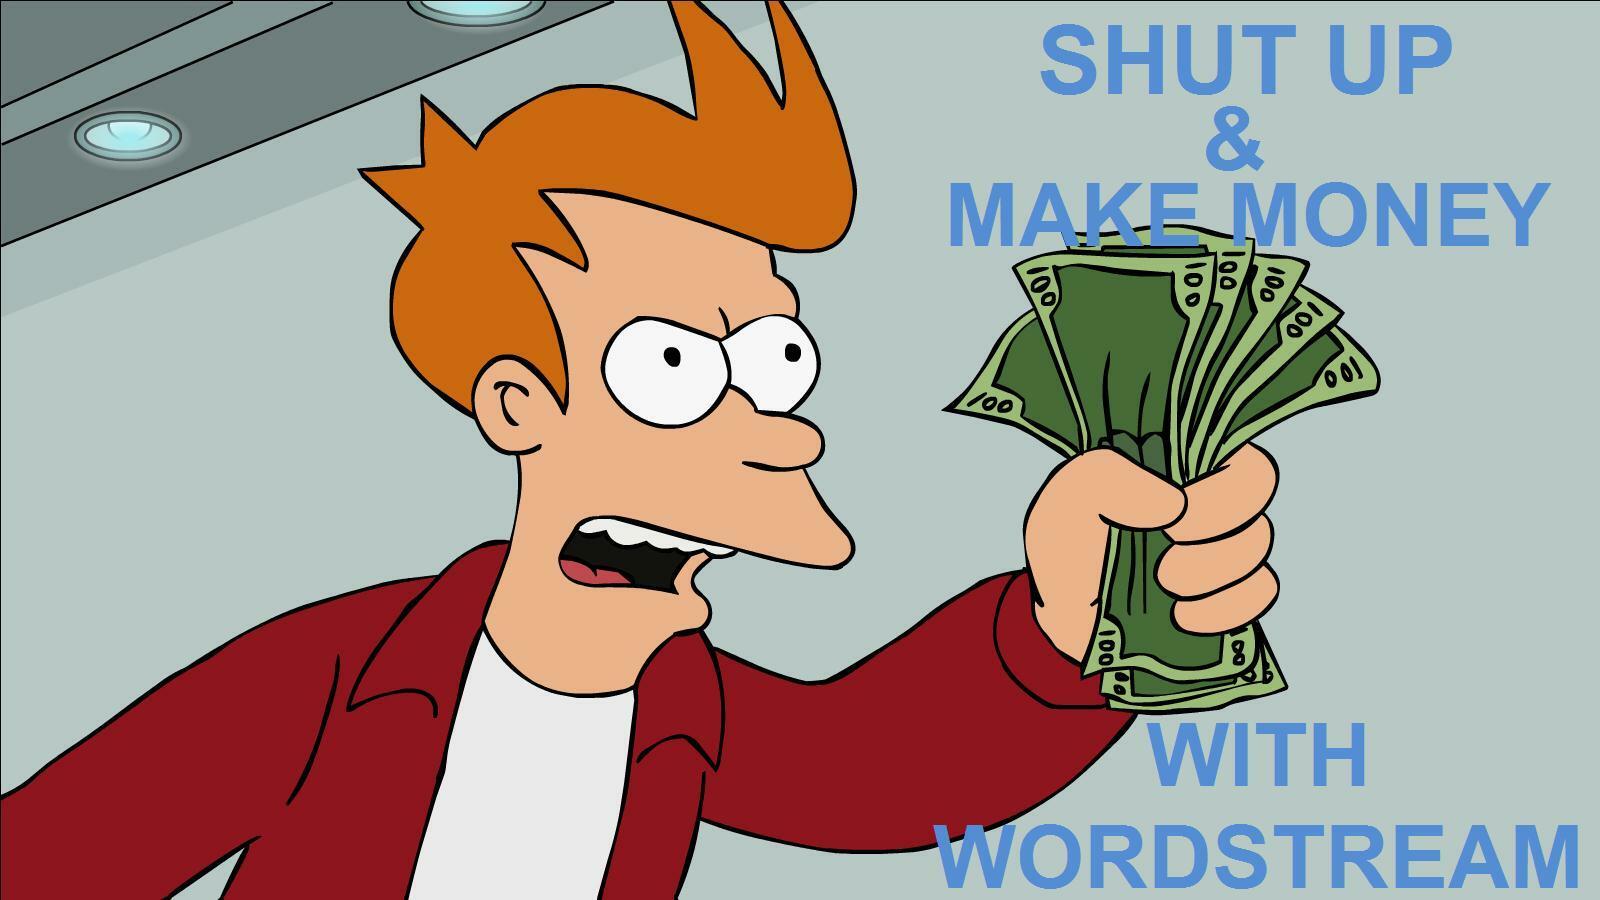 Shut up and make money with WordStream